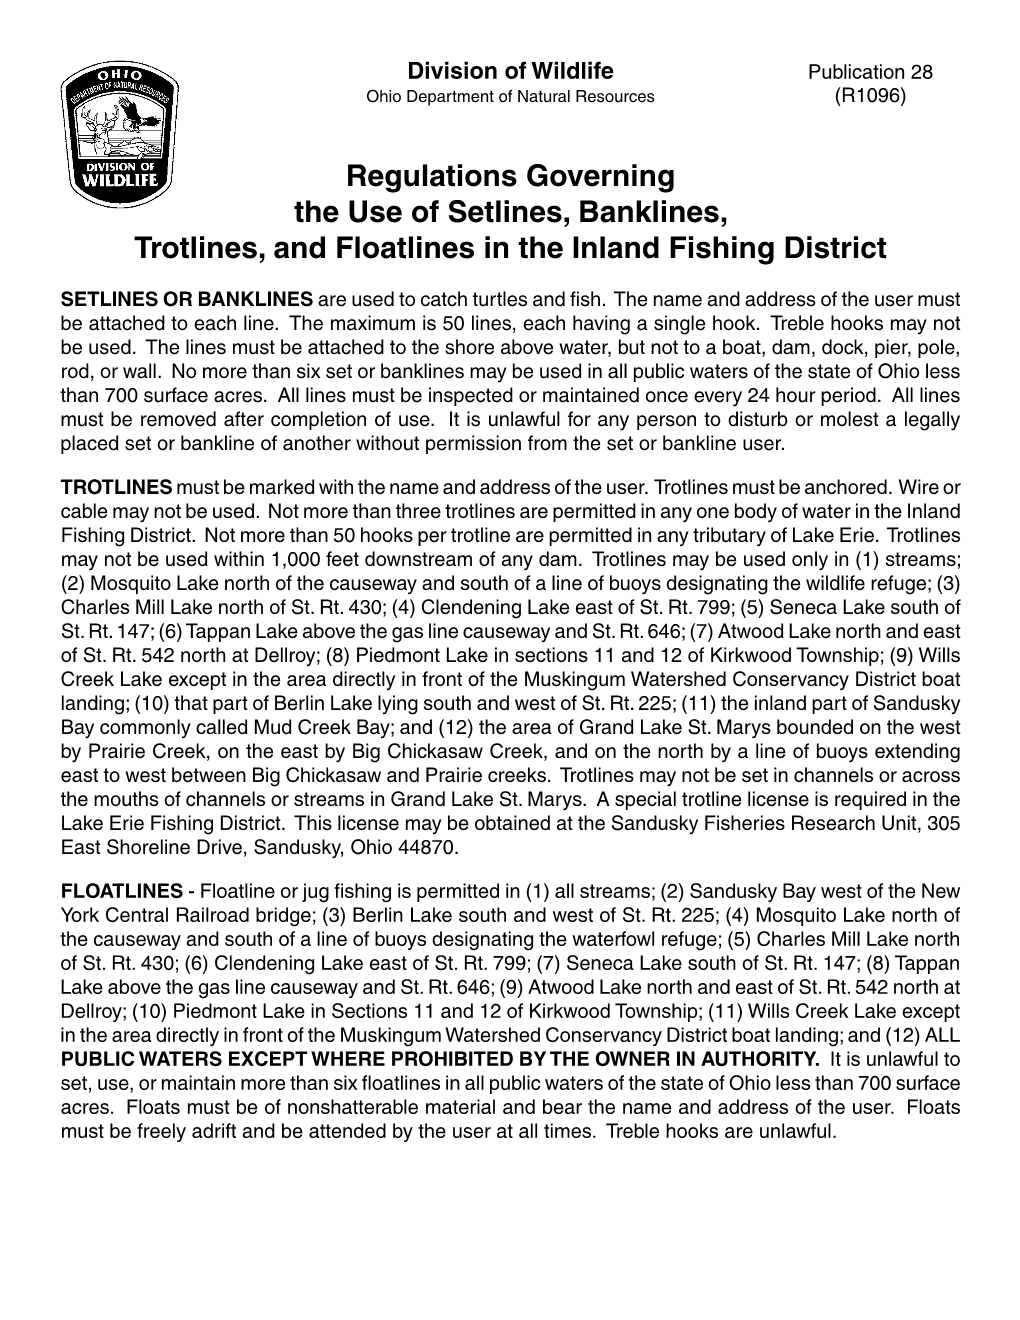 Regulations Governing the Use of Setlines, Banklines, Trotlines, and Floatlines in the Inland Fishing District